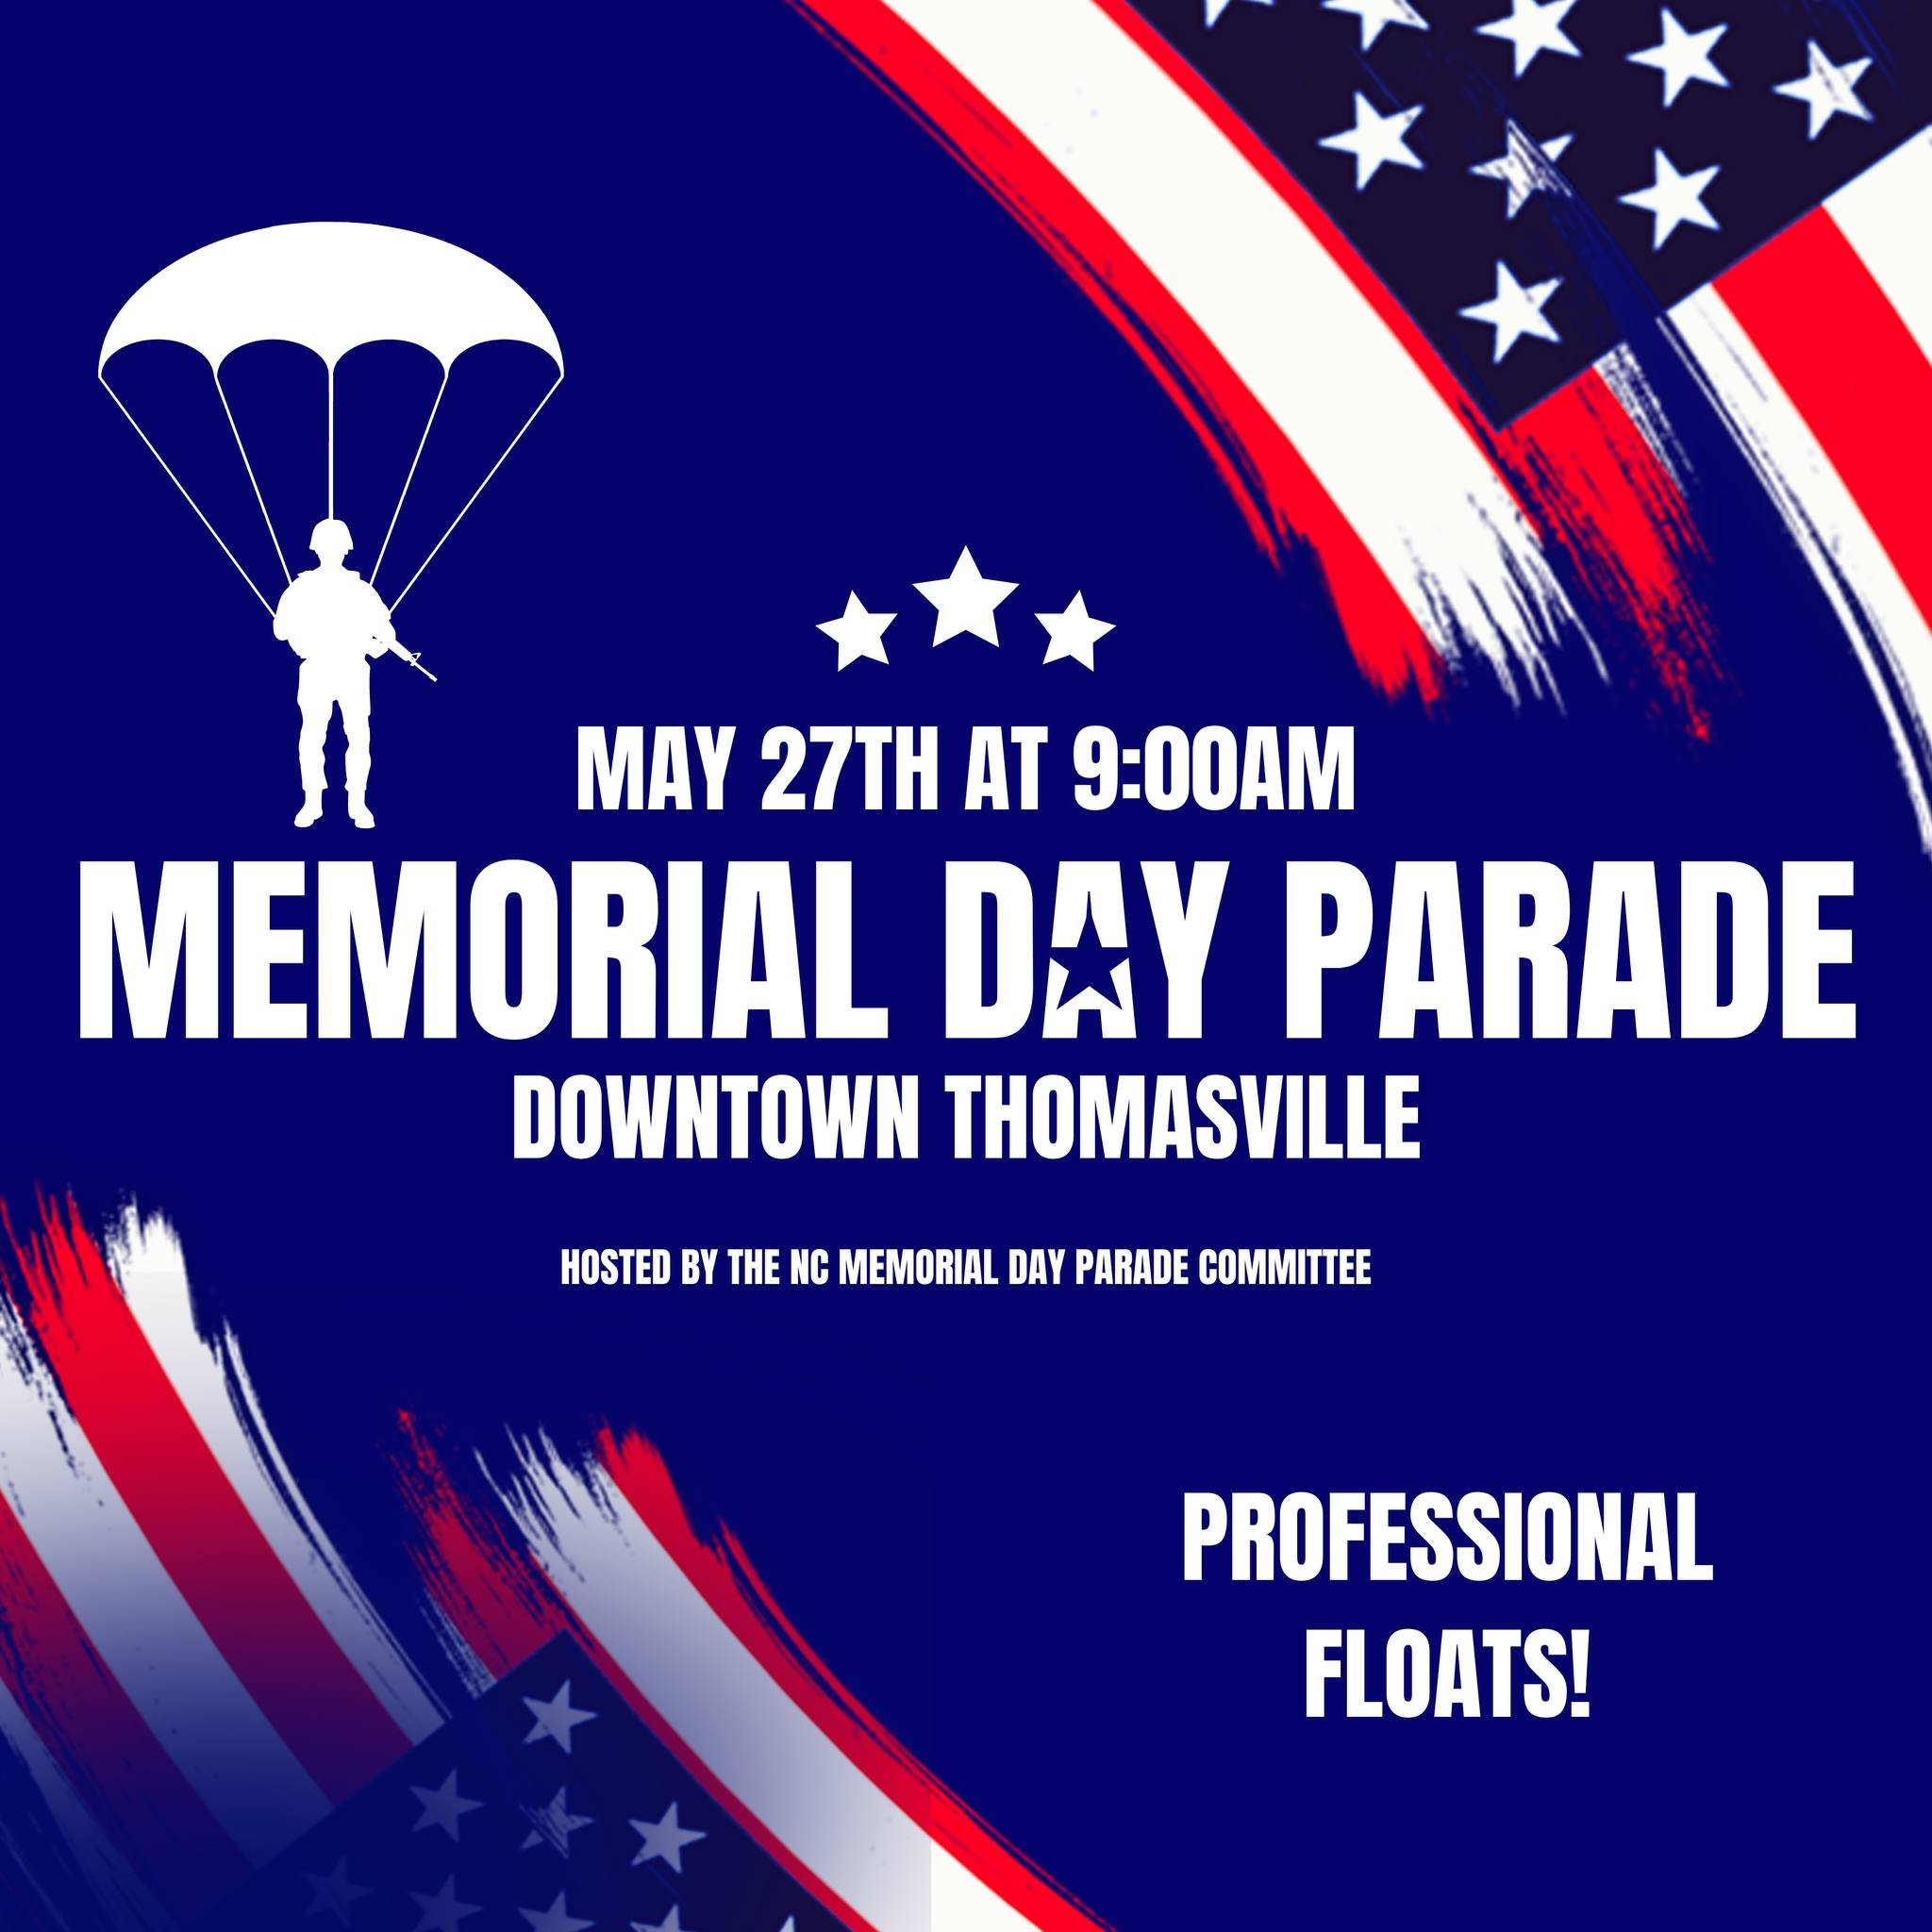 Join Thomasville, NC for the largest Memorial Day Parade in the Southeast! The Parade begins along Main Street across from the water fountain at the corner of Main Street and Salem Street. The parade will turn down Salem Street to Memorial Park (Stad